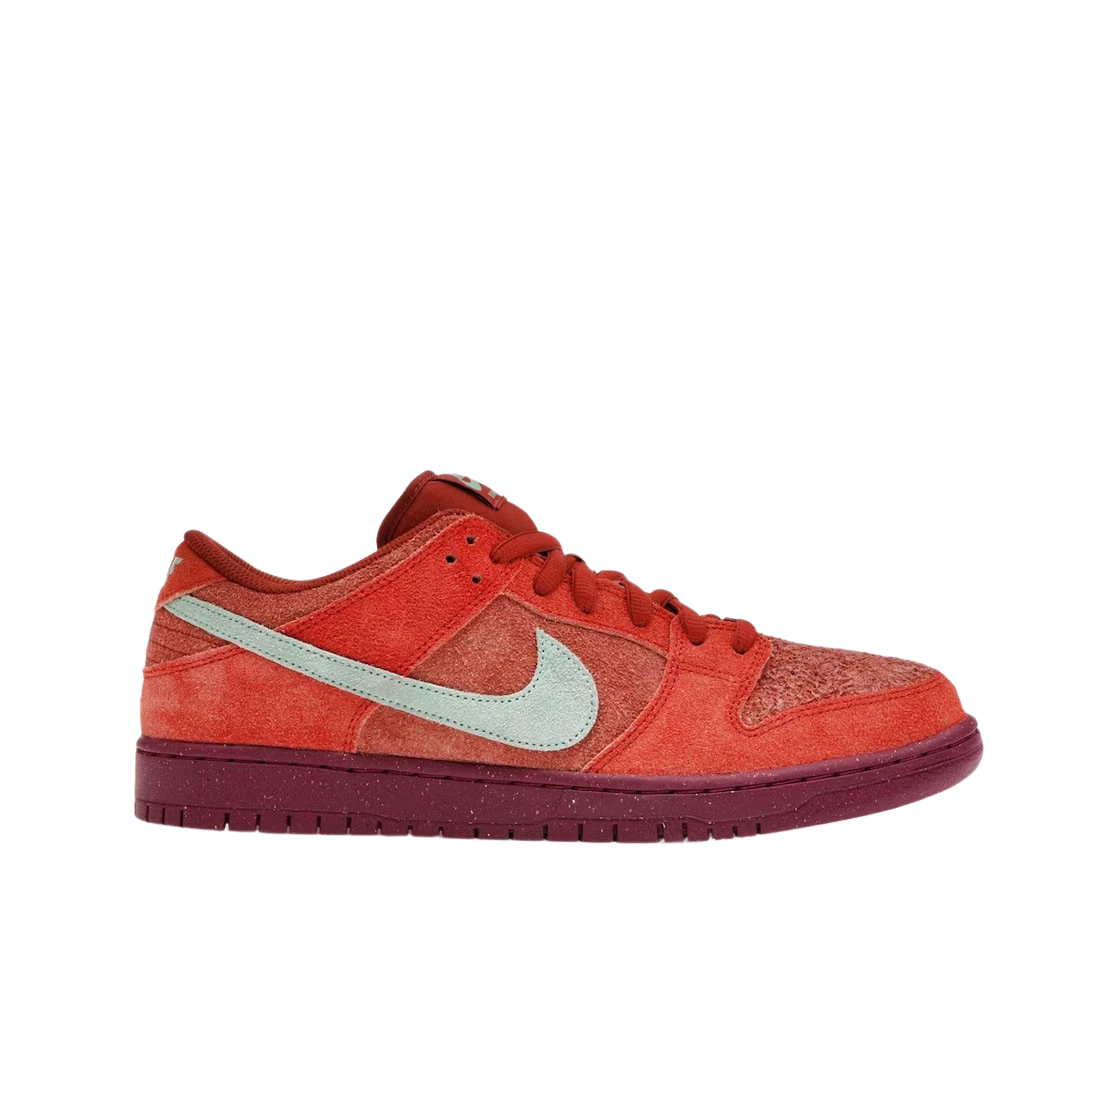 SASOM  shoes Nike SB Dunk Low Pro Premium Mystic Red and Rosewood Check  the latest price now!